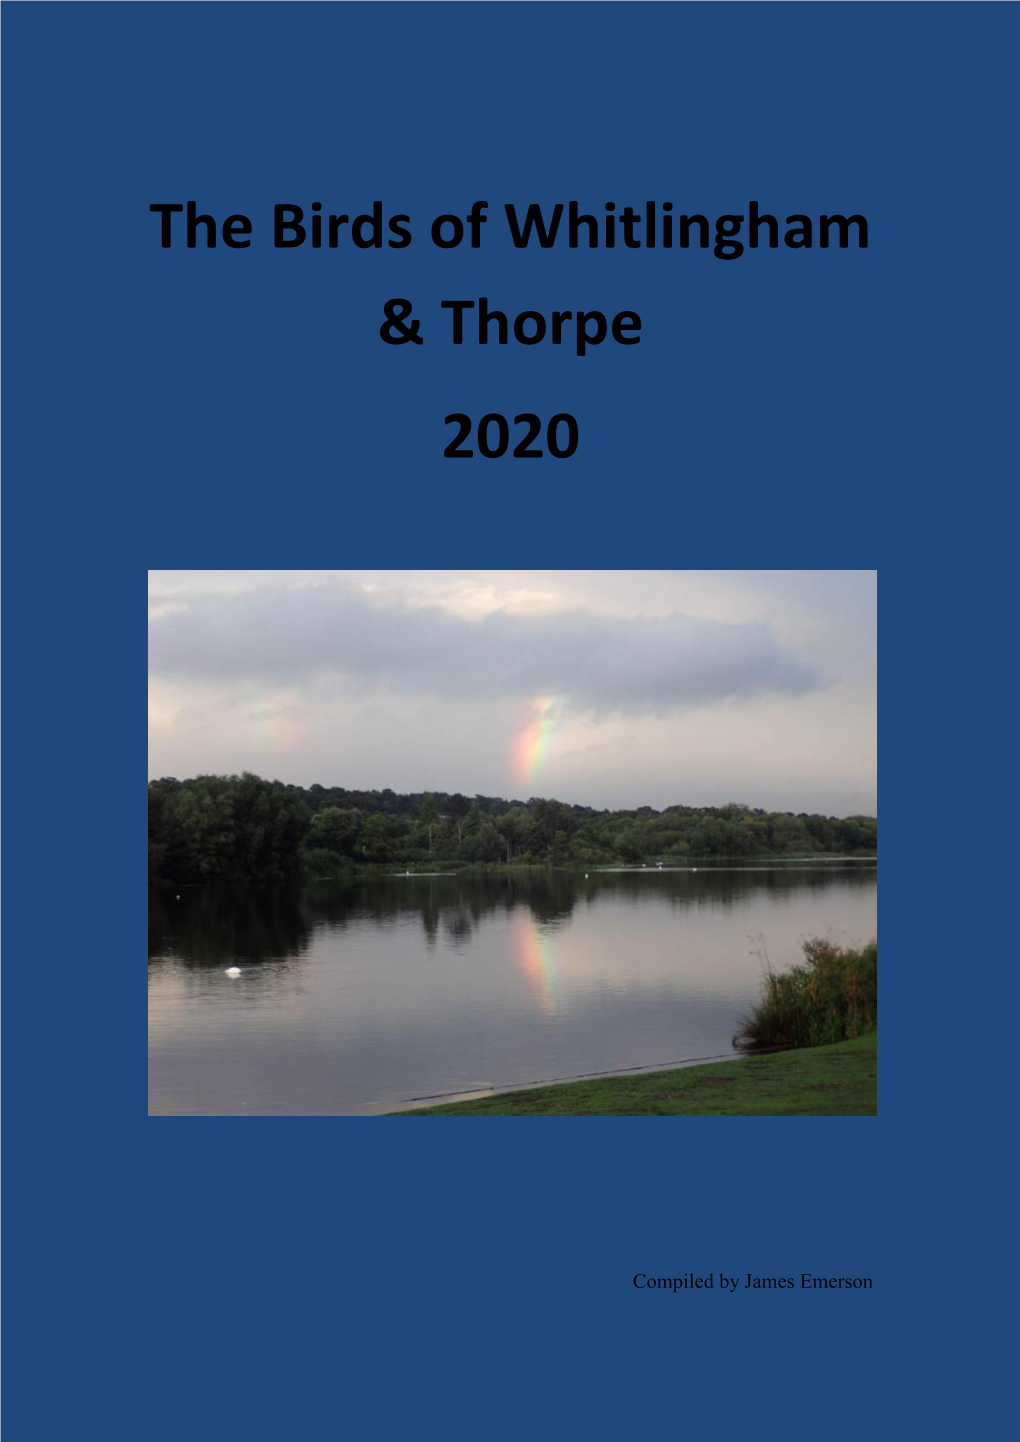 The Birds of Whitlingham & Thorpe 2020